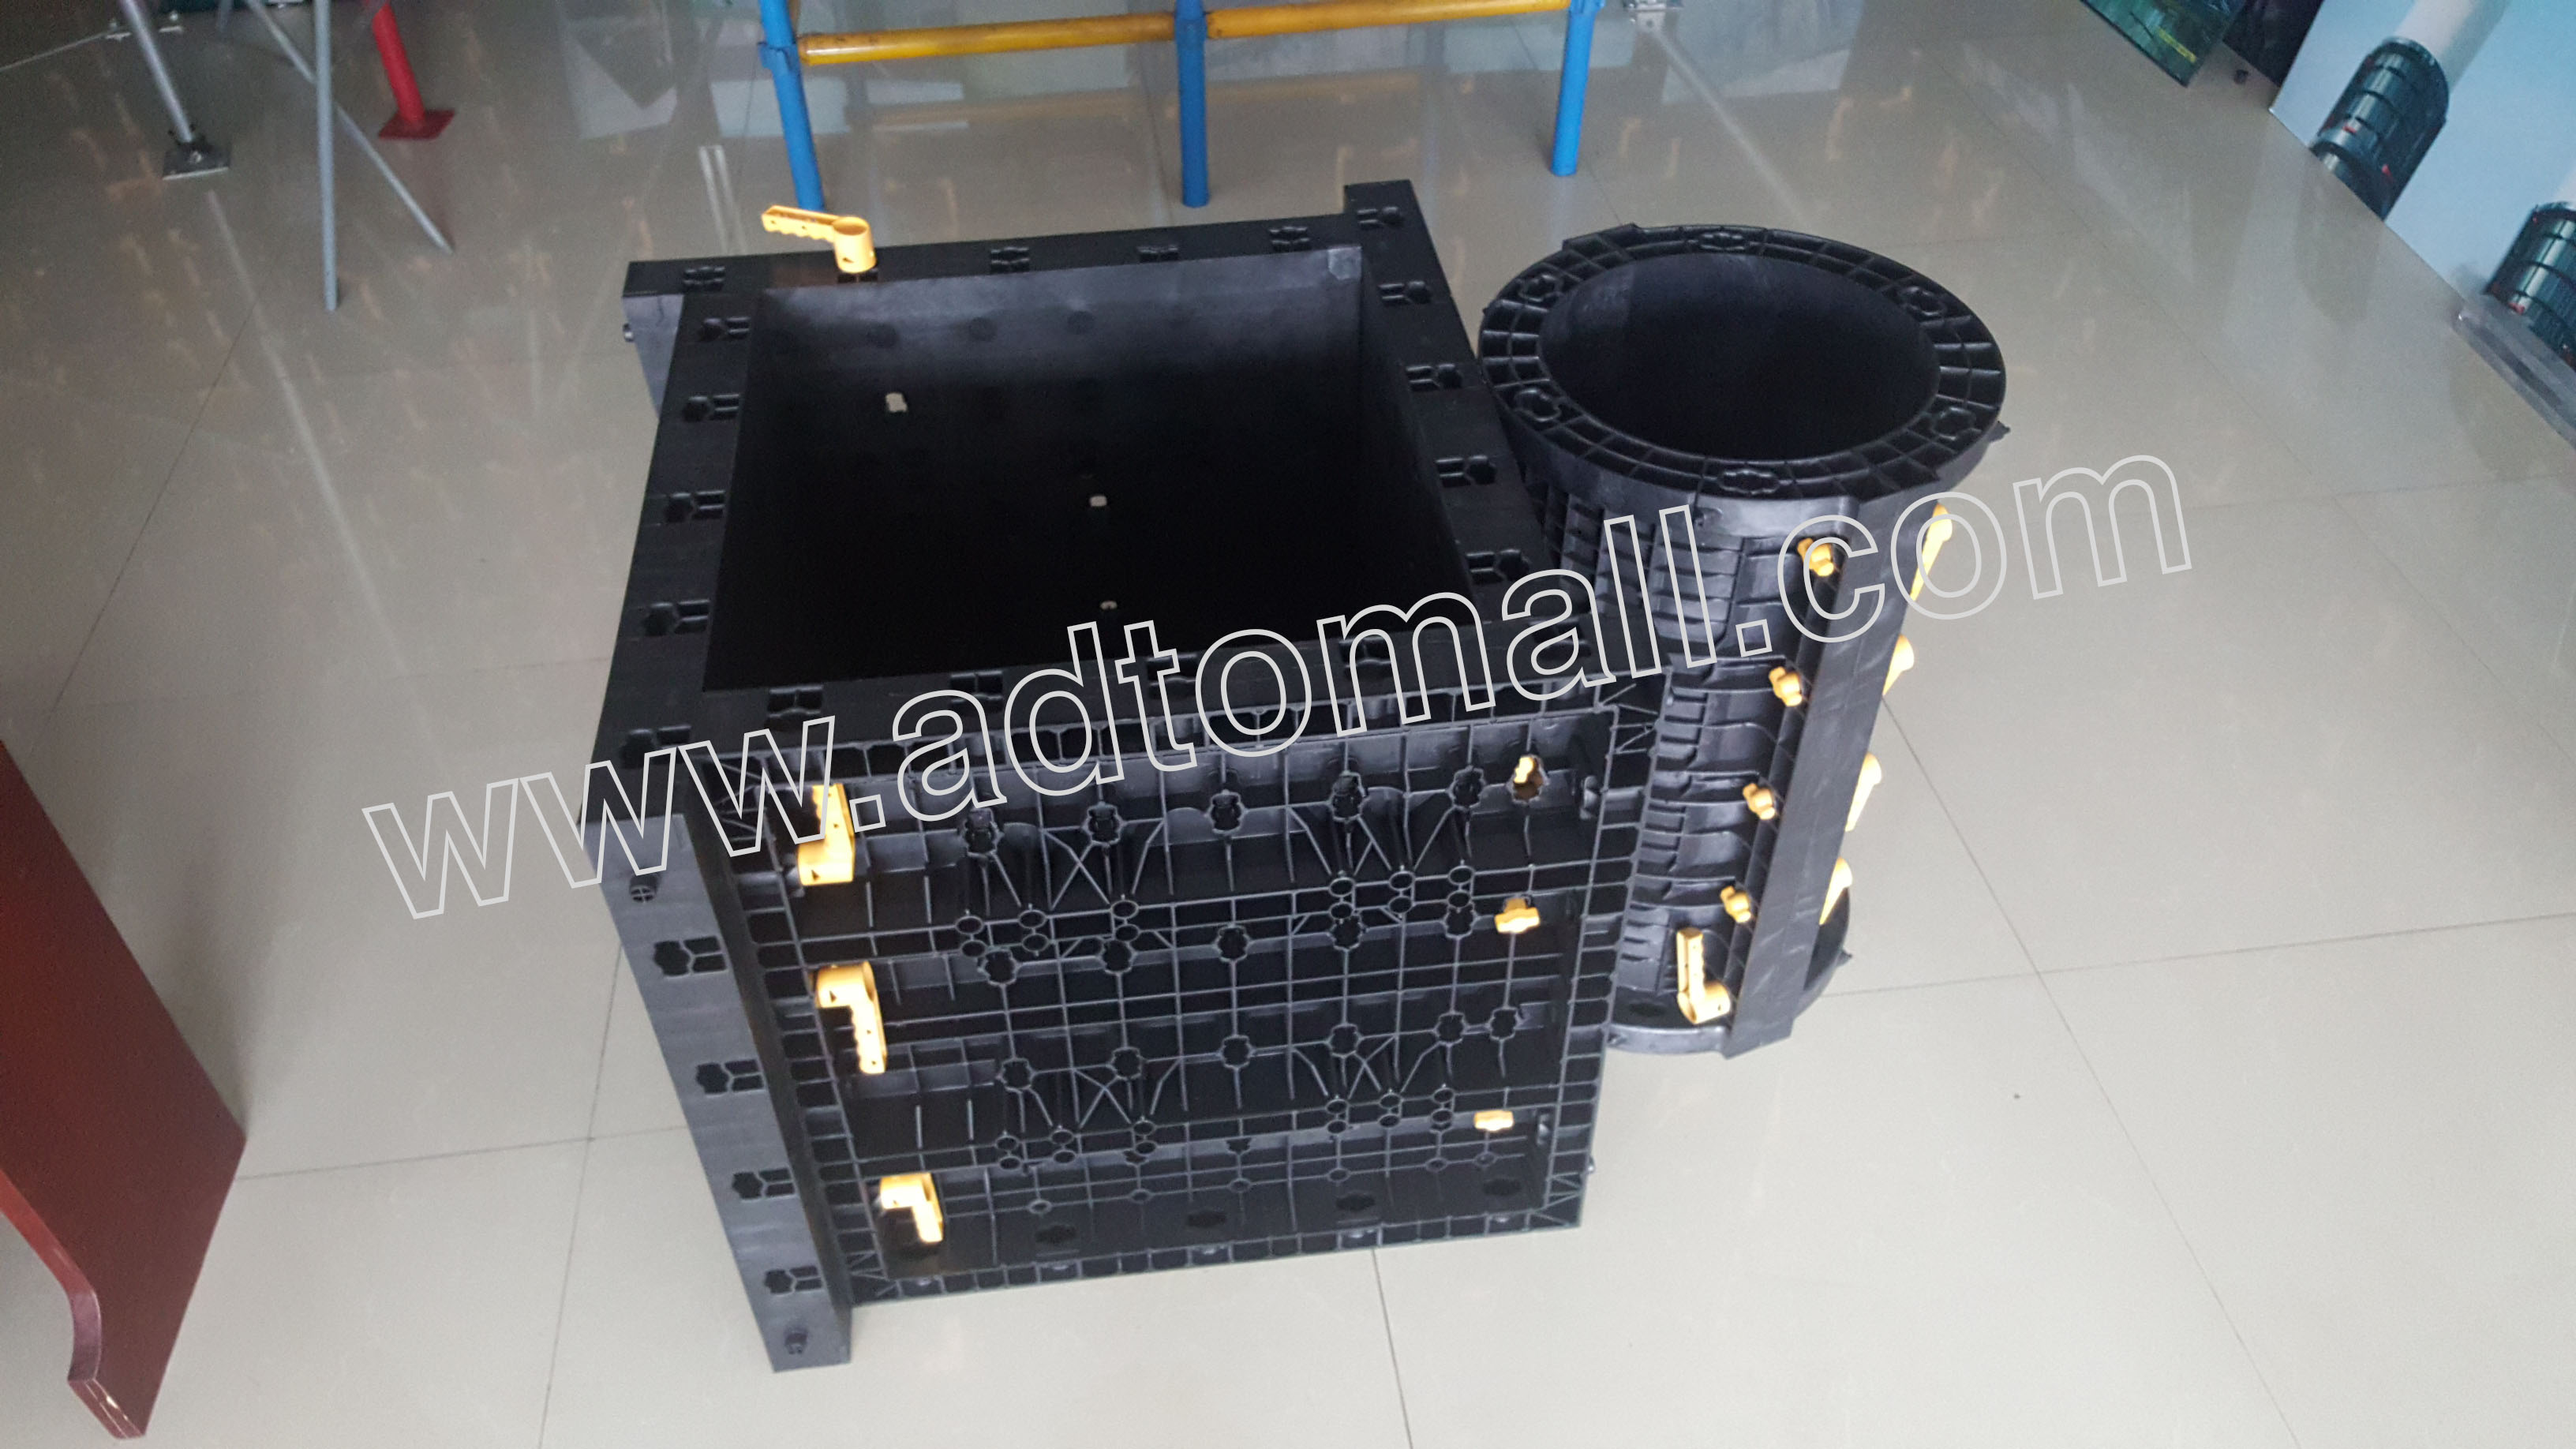 plastic formwork product images